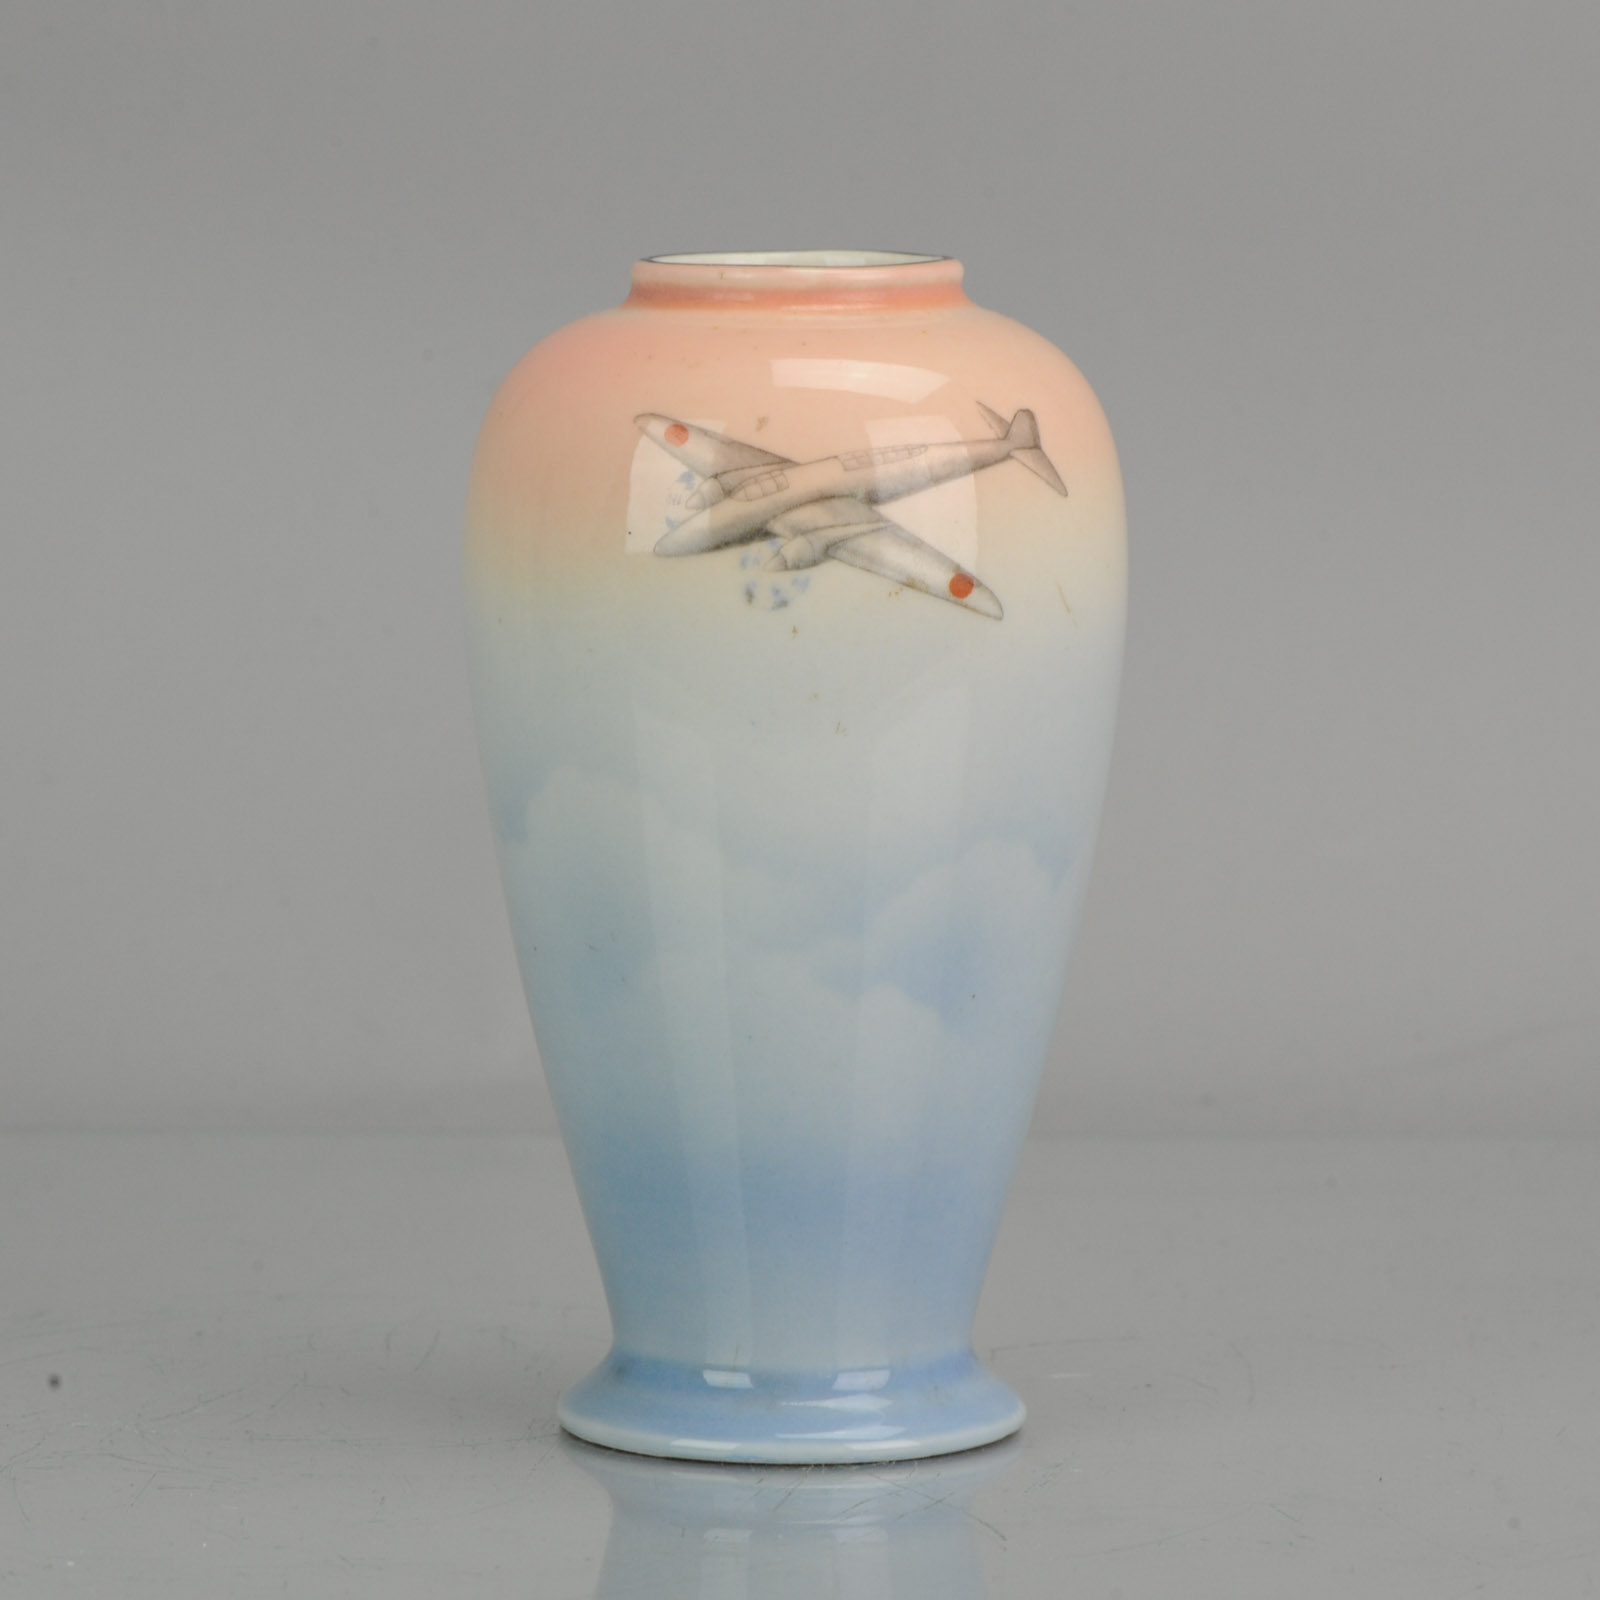 1942 PreWar early Showa Perfect Antique Japanese Vase Fighter Plane Quality